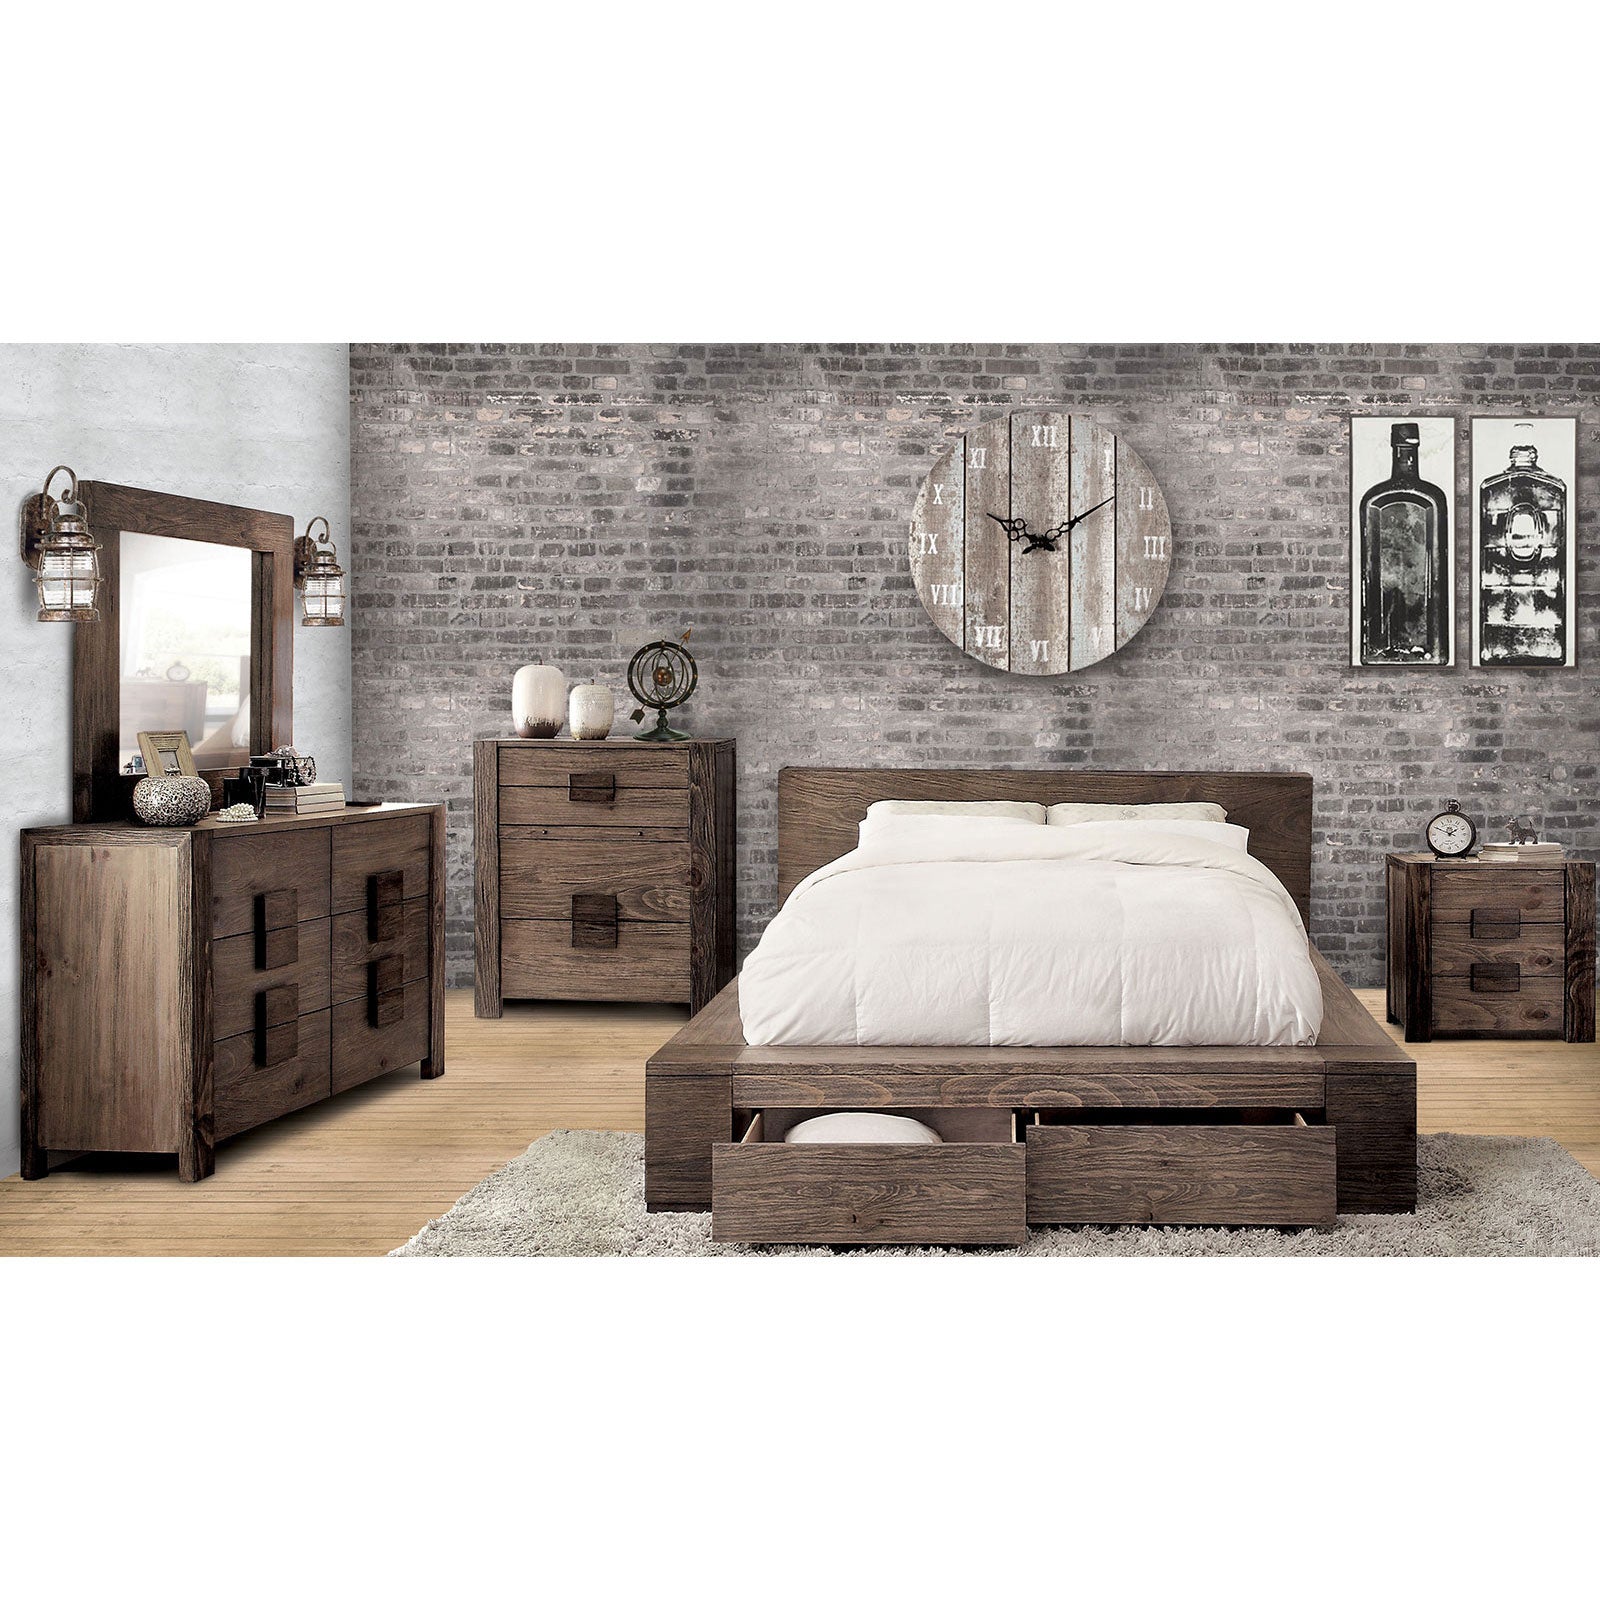 JANEIRO Rustic Natural Tone Queen Bed